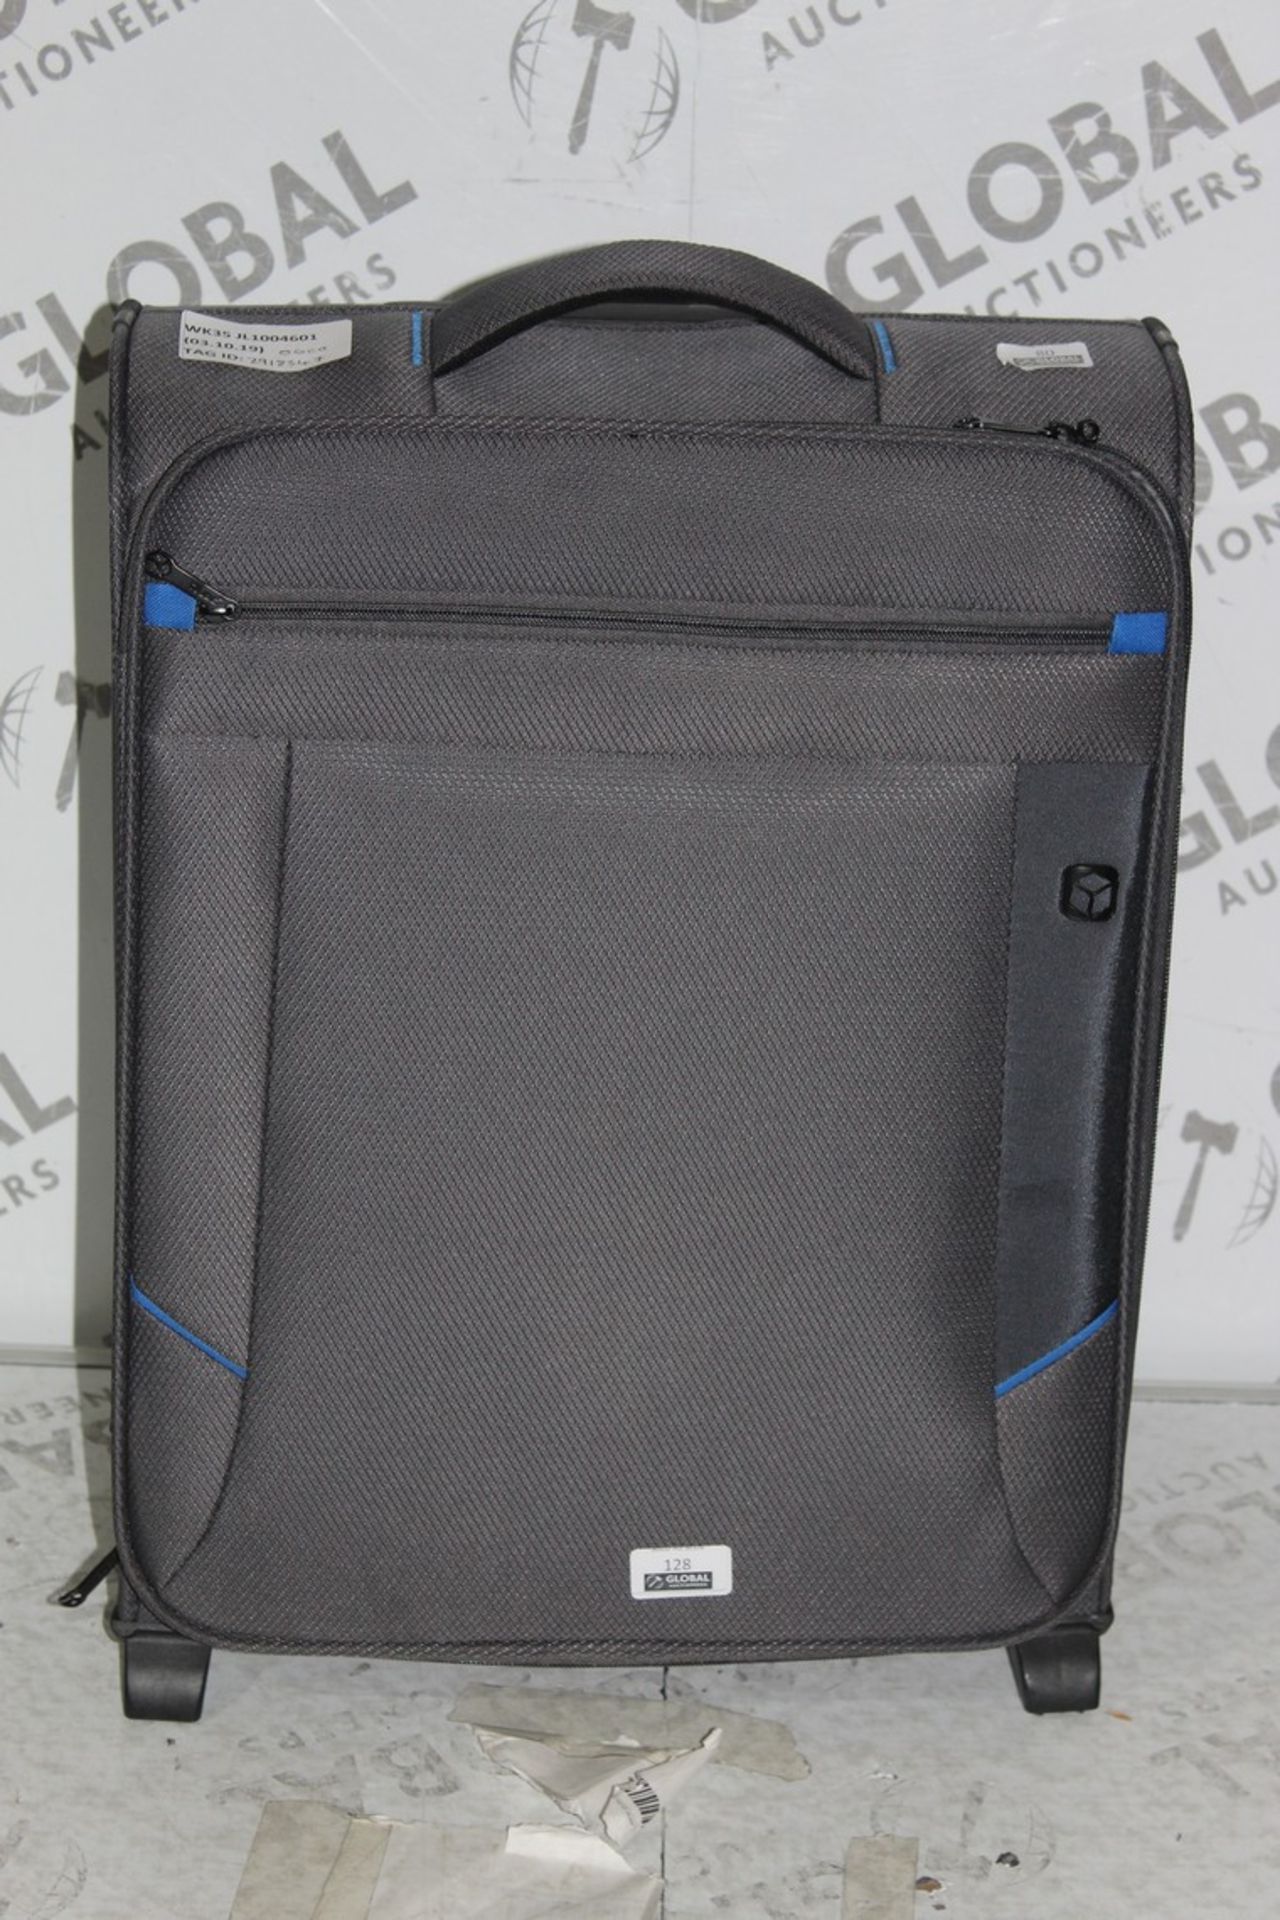 Qubed Decimal Anthracite Grey Cabin Bag RRP £60 (2918347) (Public Viewing and Appraisals Available)